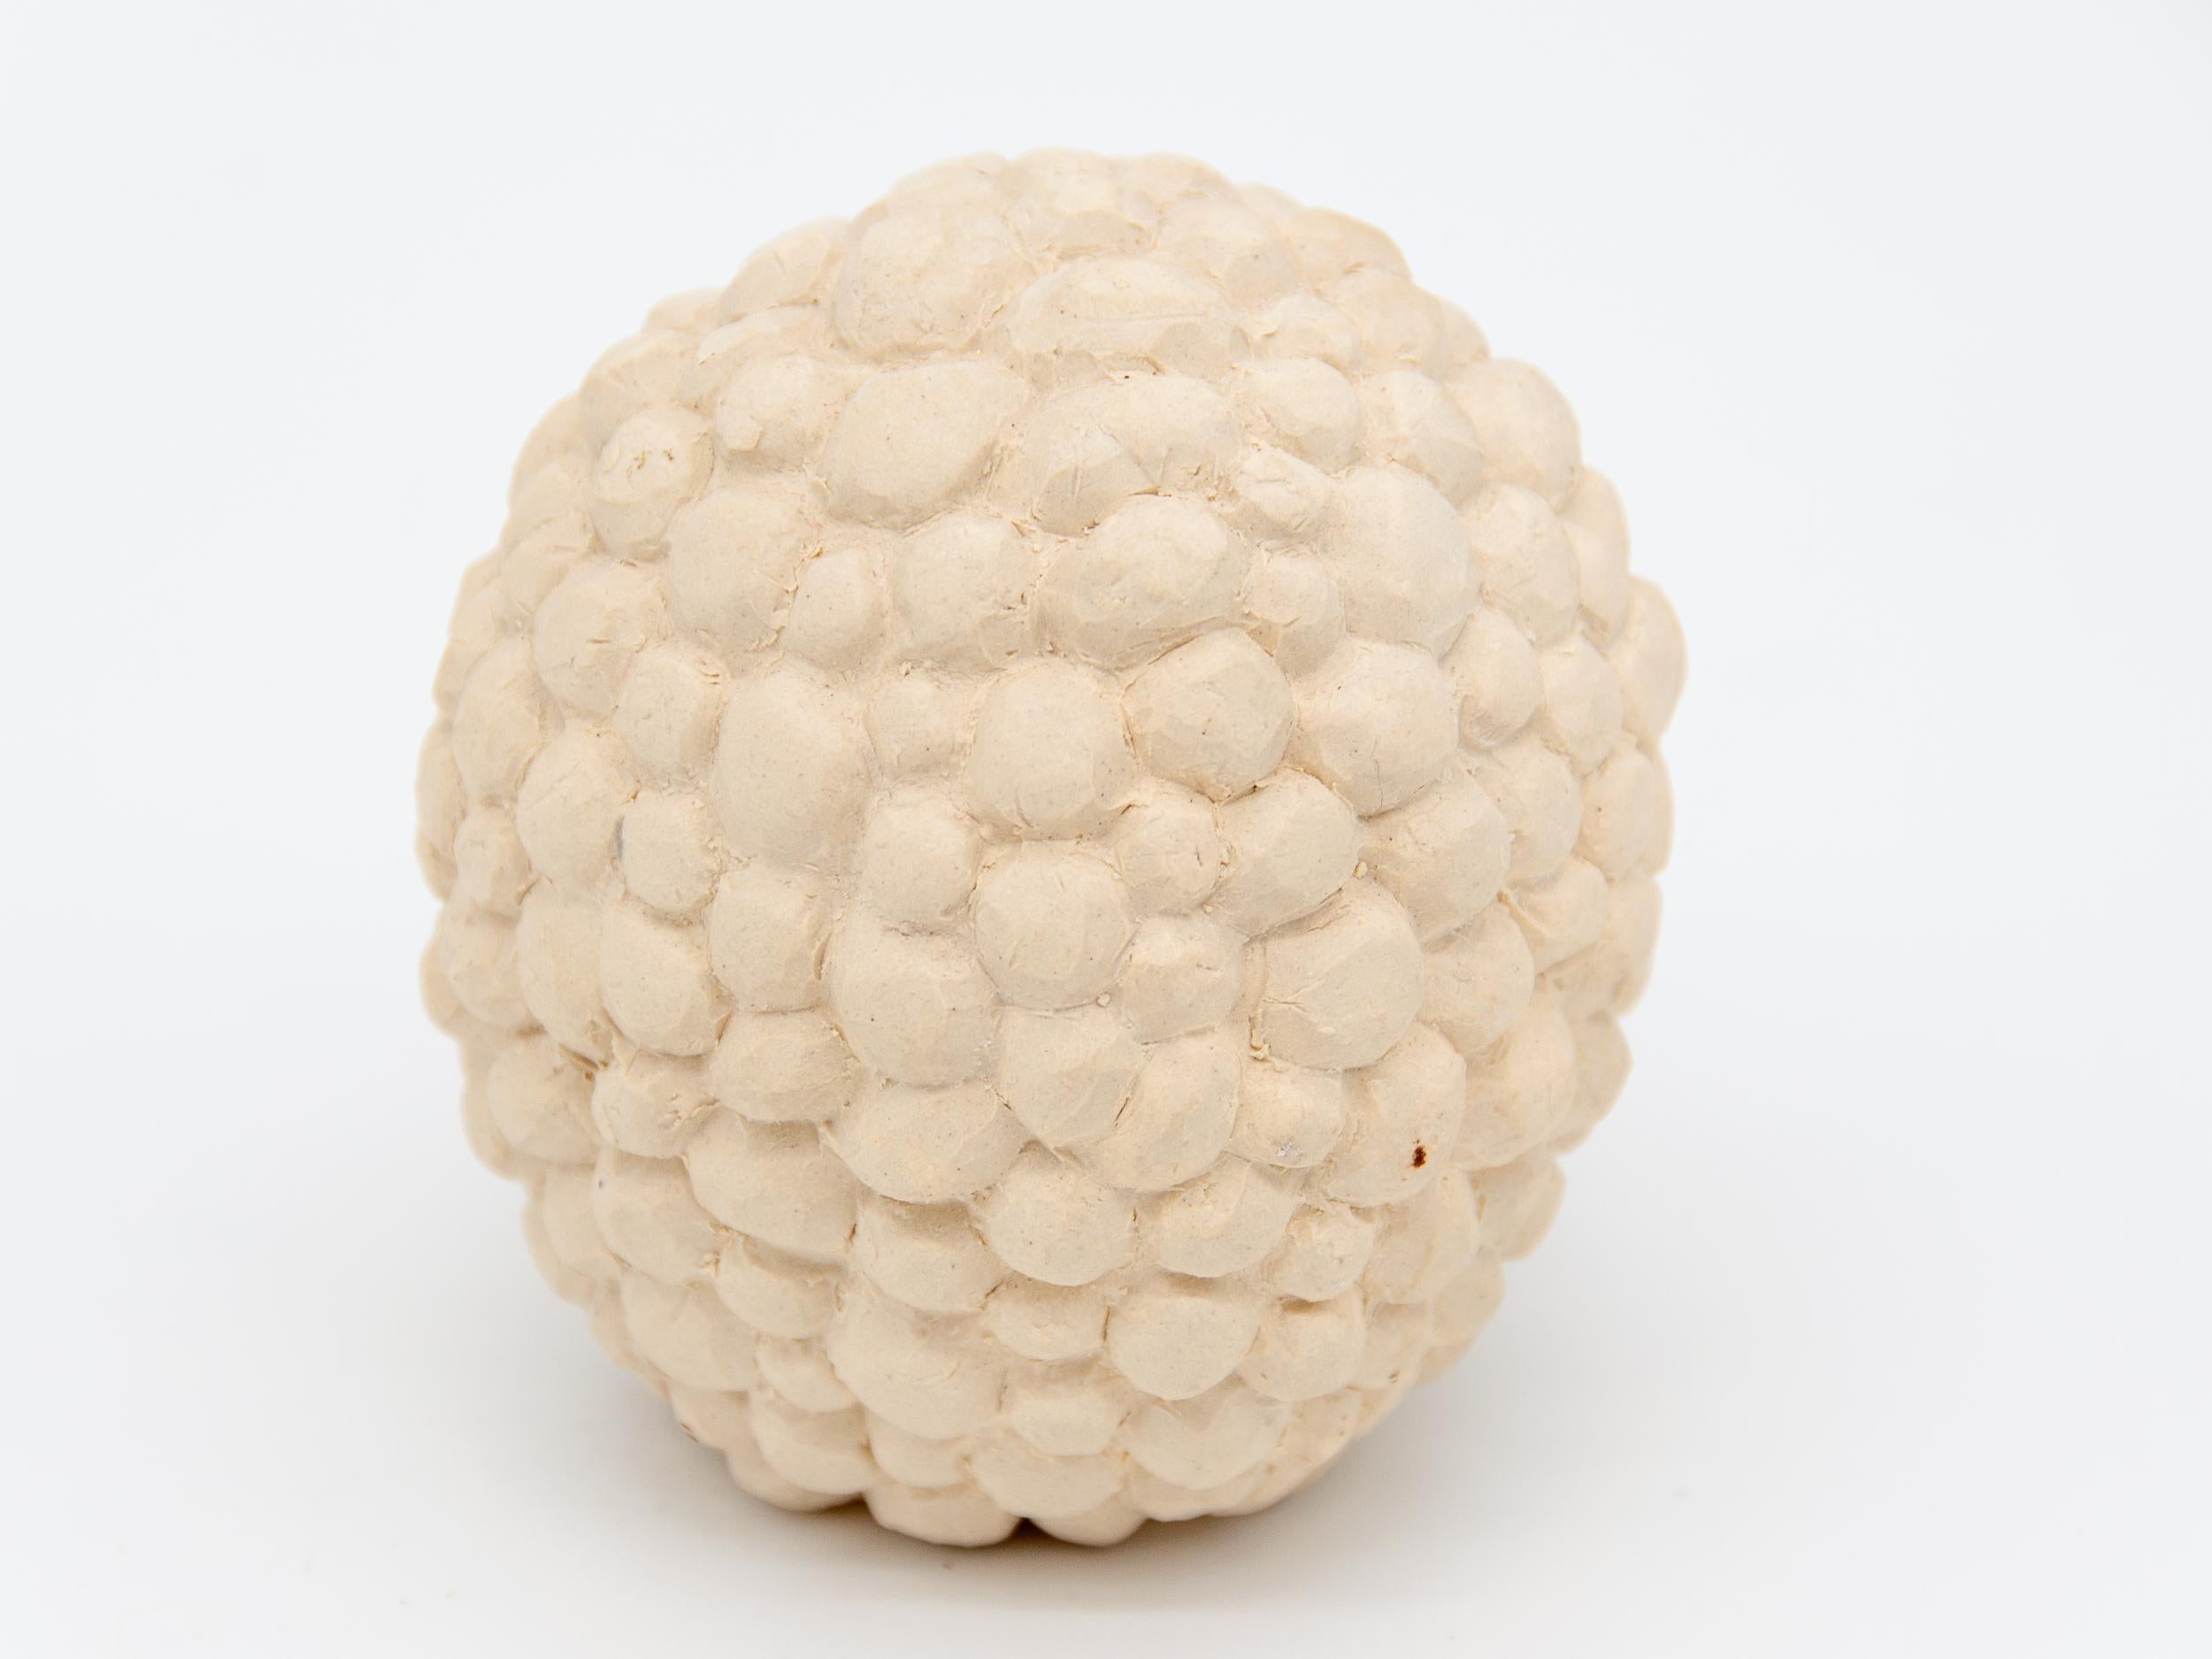 Isabel Halley a 21st-century ceramic artist based in Brooklyn, NY. She handcrafts all her designs making her signature bumpy style. This decorative bumpy object is unglazed.